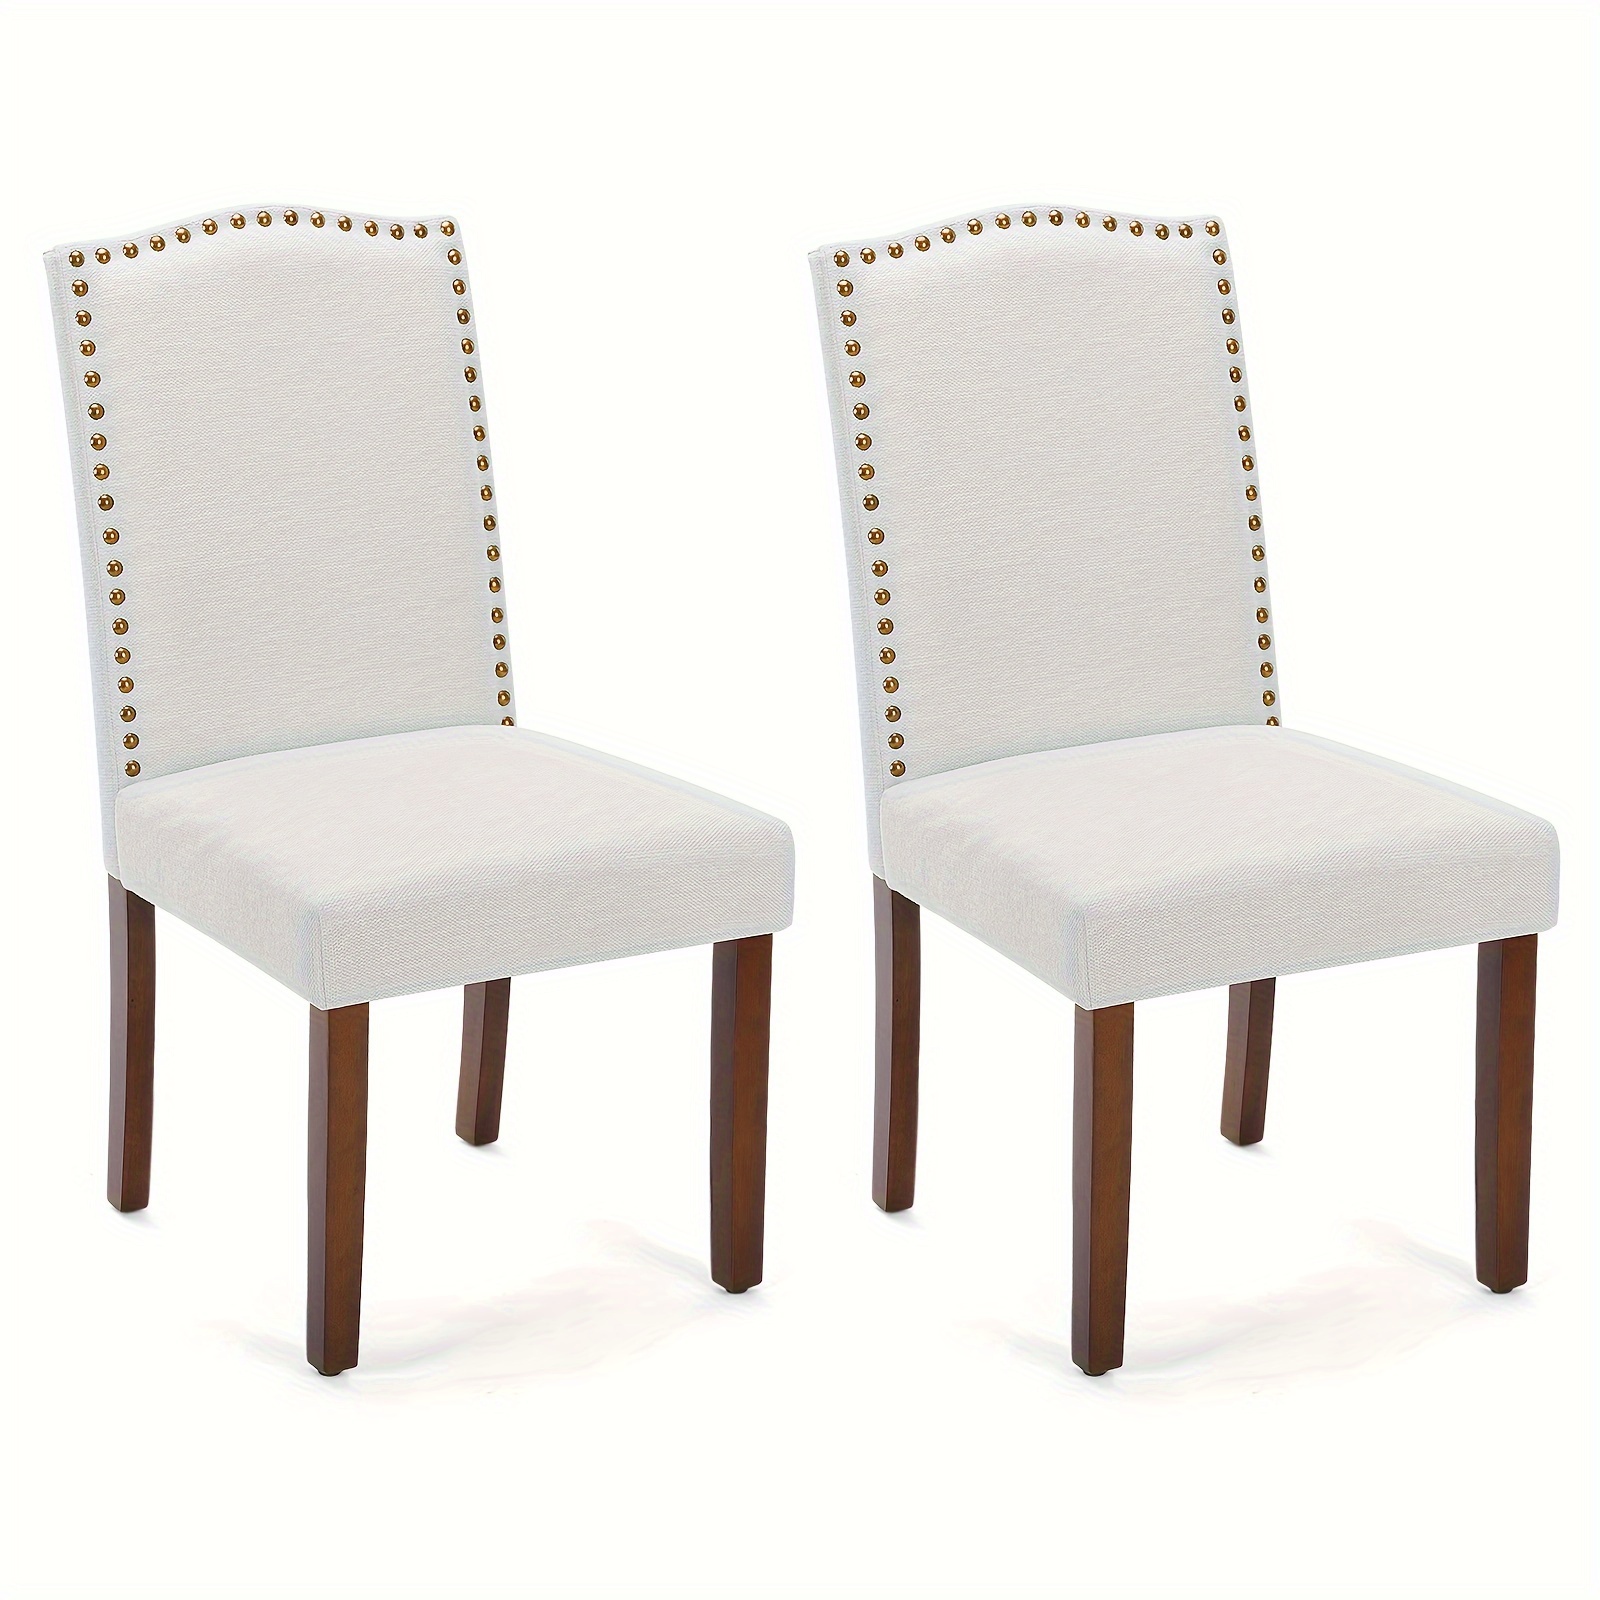 

Dining Chairs Set Of 2, High-end Upholstered Leather Dining Room Chair With Nailhead Trim And Wood Legs, Dining Room Kitchen Side Chair For Bedroom, Living Room, Dining Room